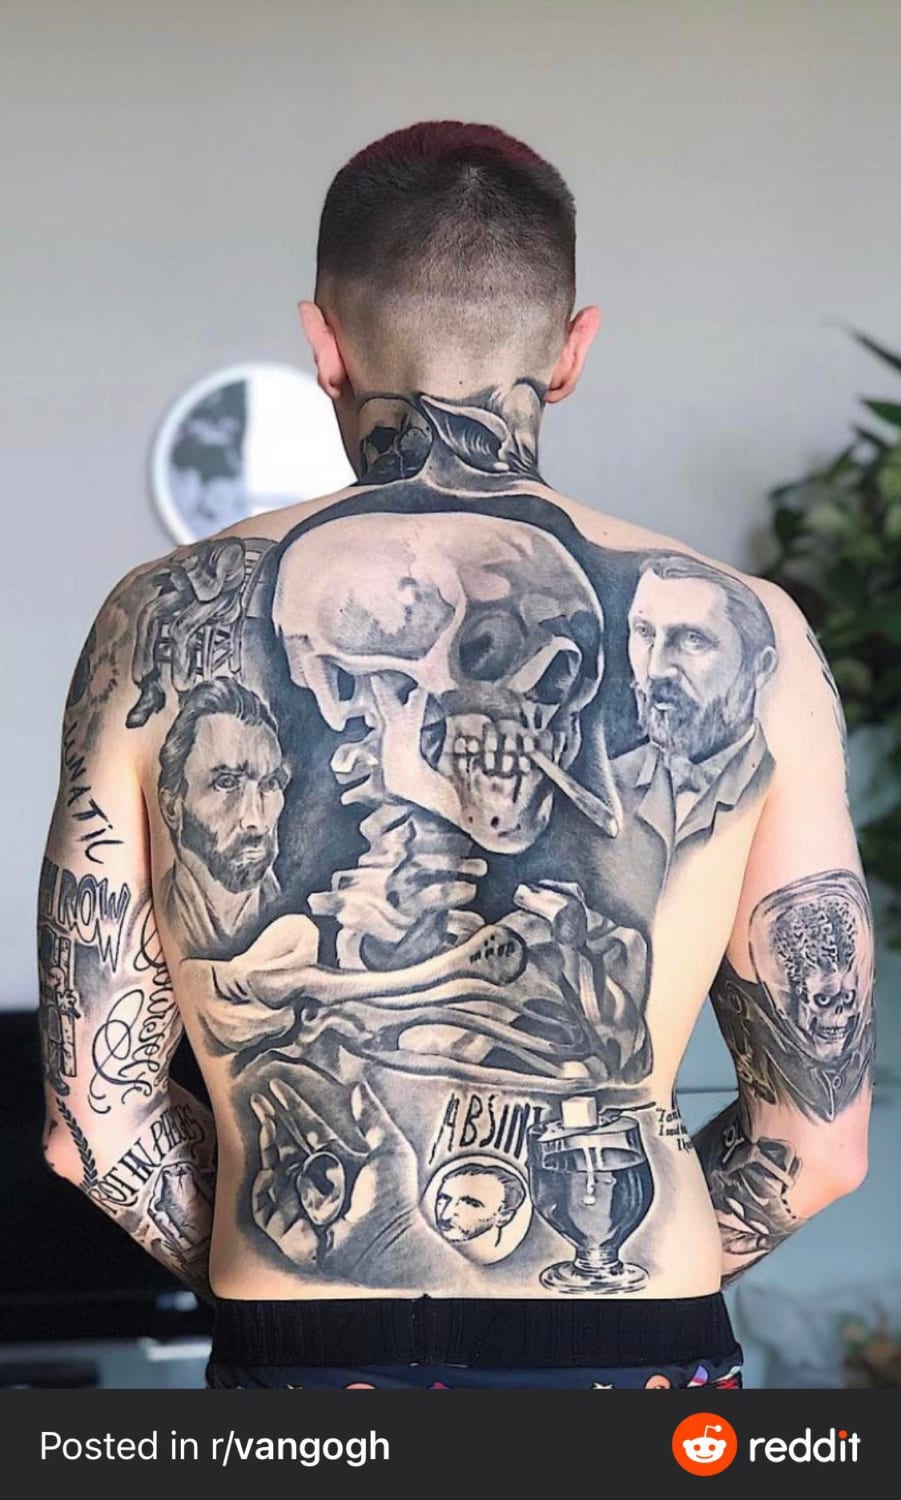 My back tattoos inspired by Van Gogh’s life and art ! Made by Thomas @ Tattoo 23 in Nice, France.